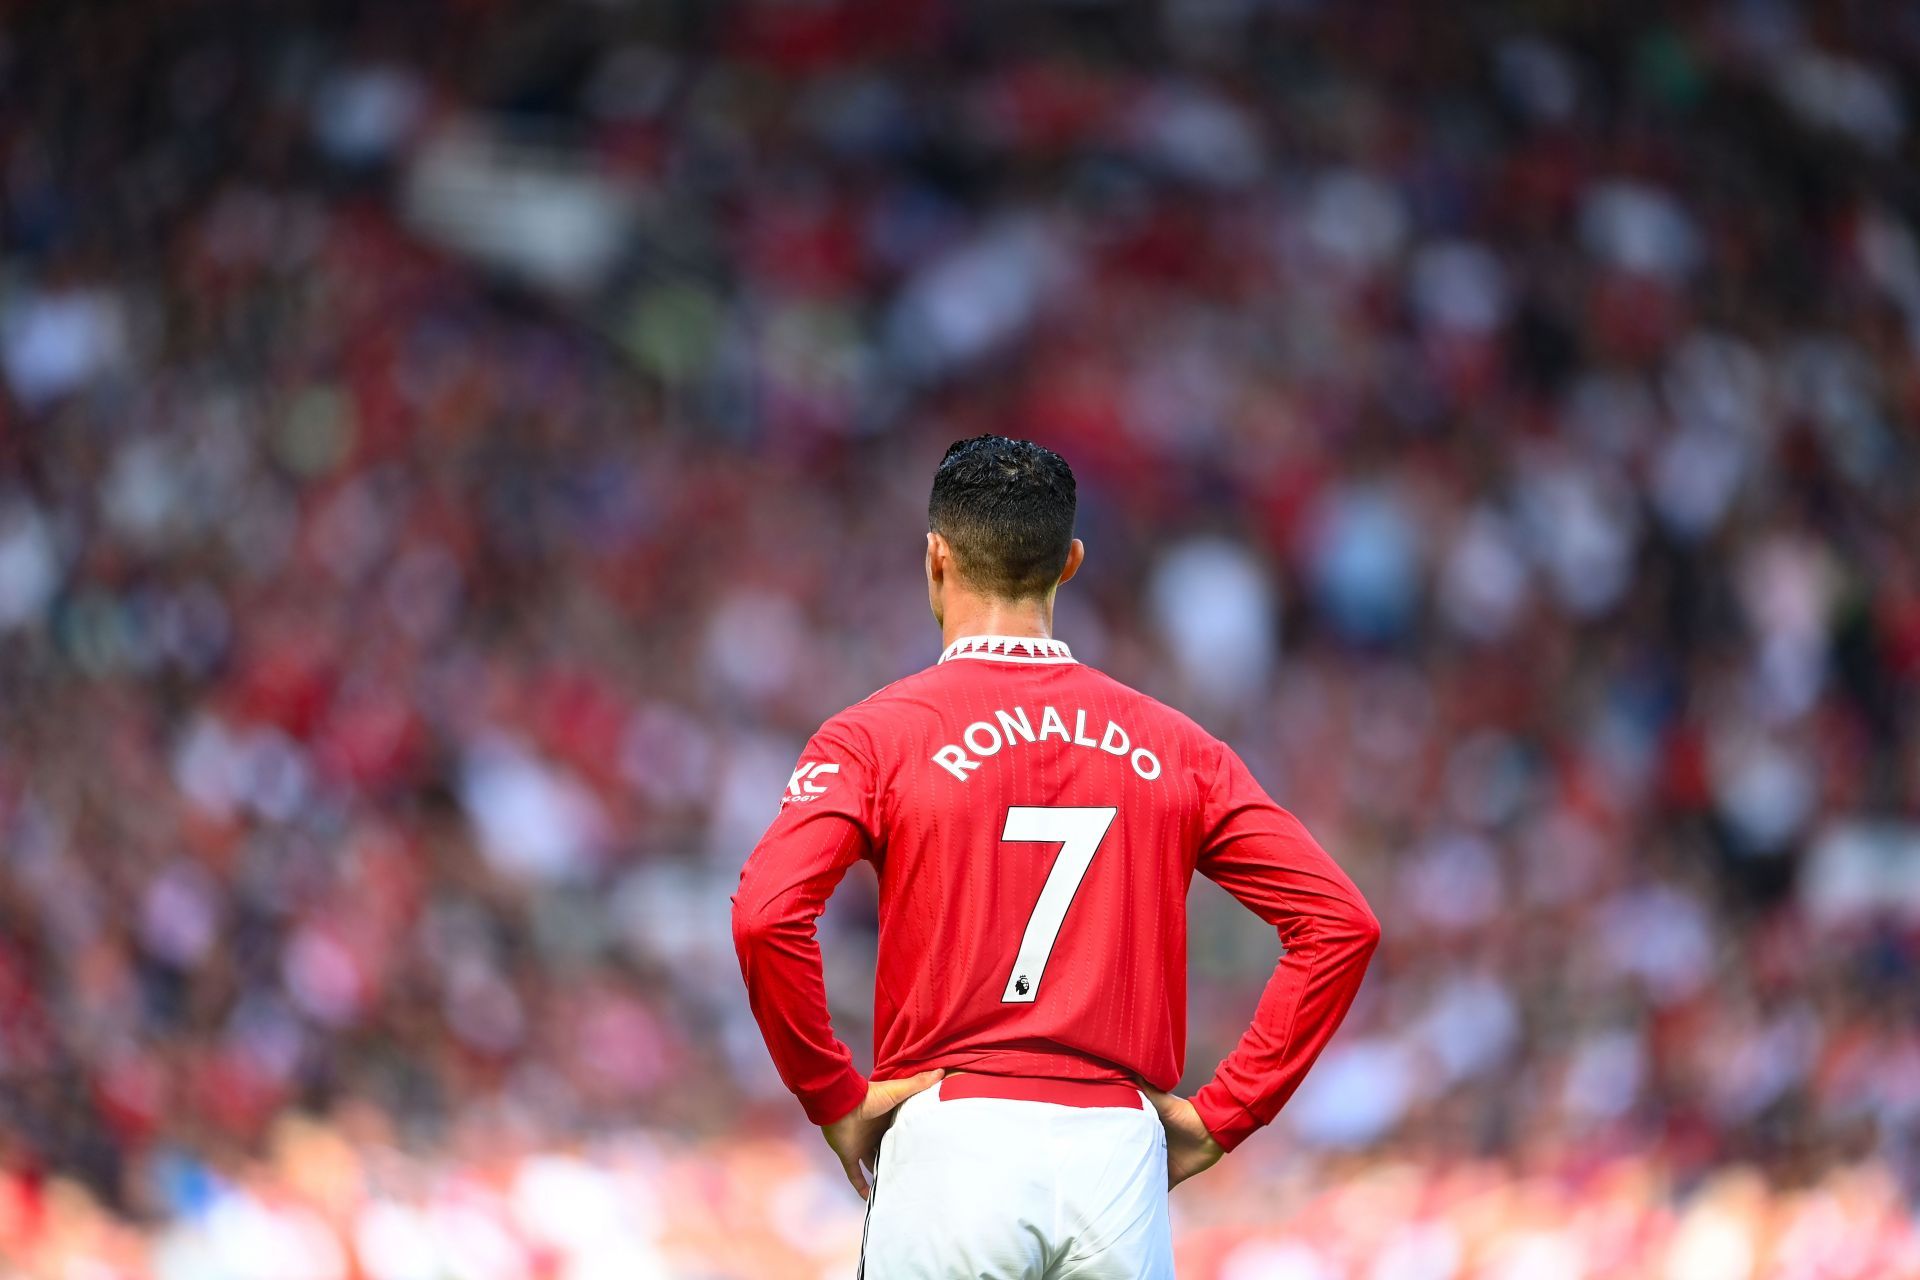 It may be time to say goodbye to Cristiano Ronaldo